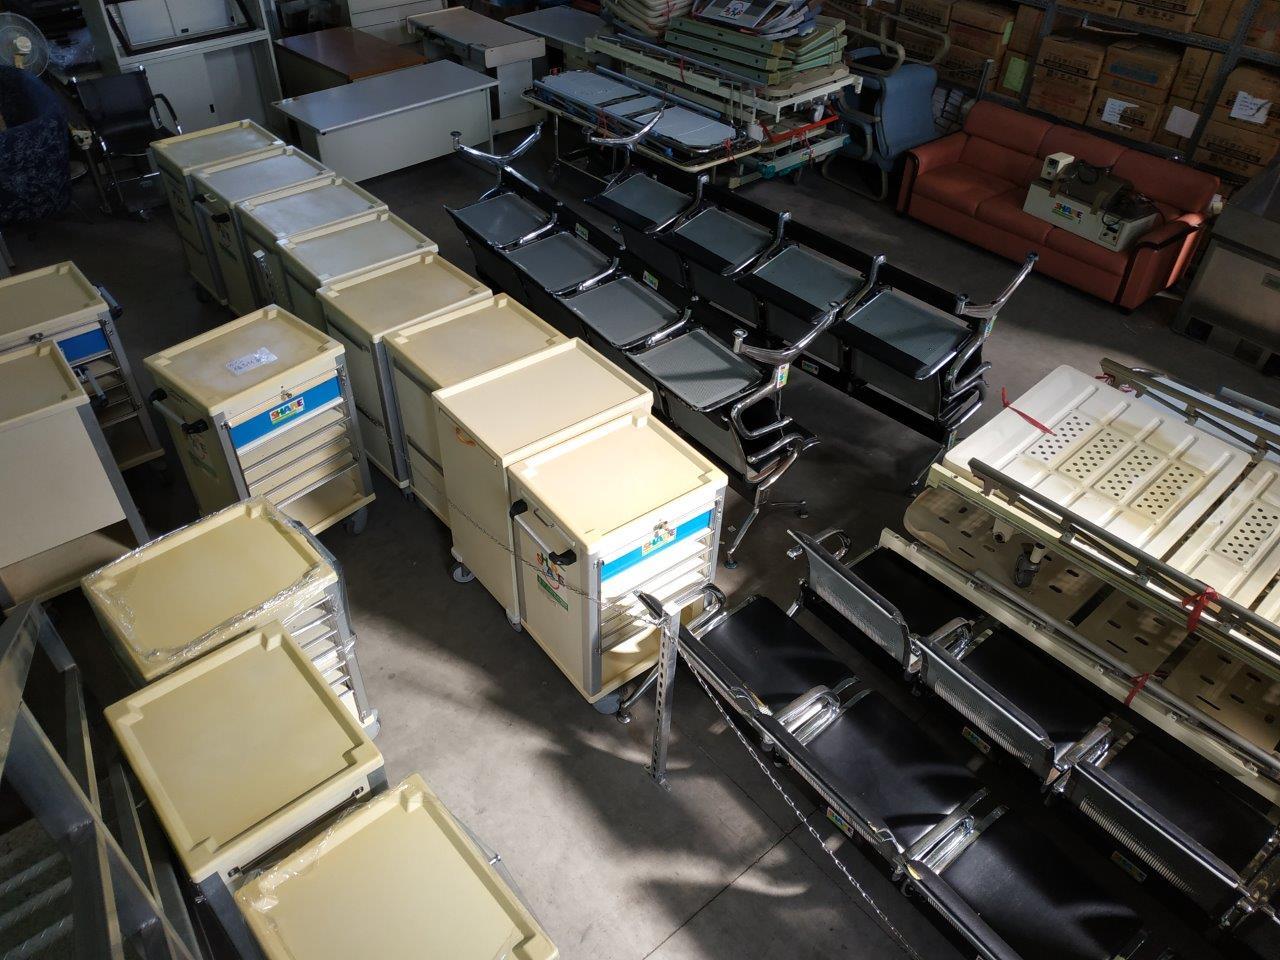 Donated medical supplies includes hospital trolleys and waiting chairs